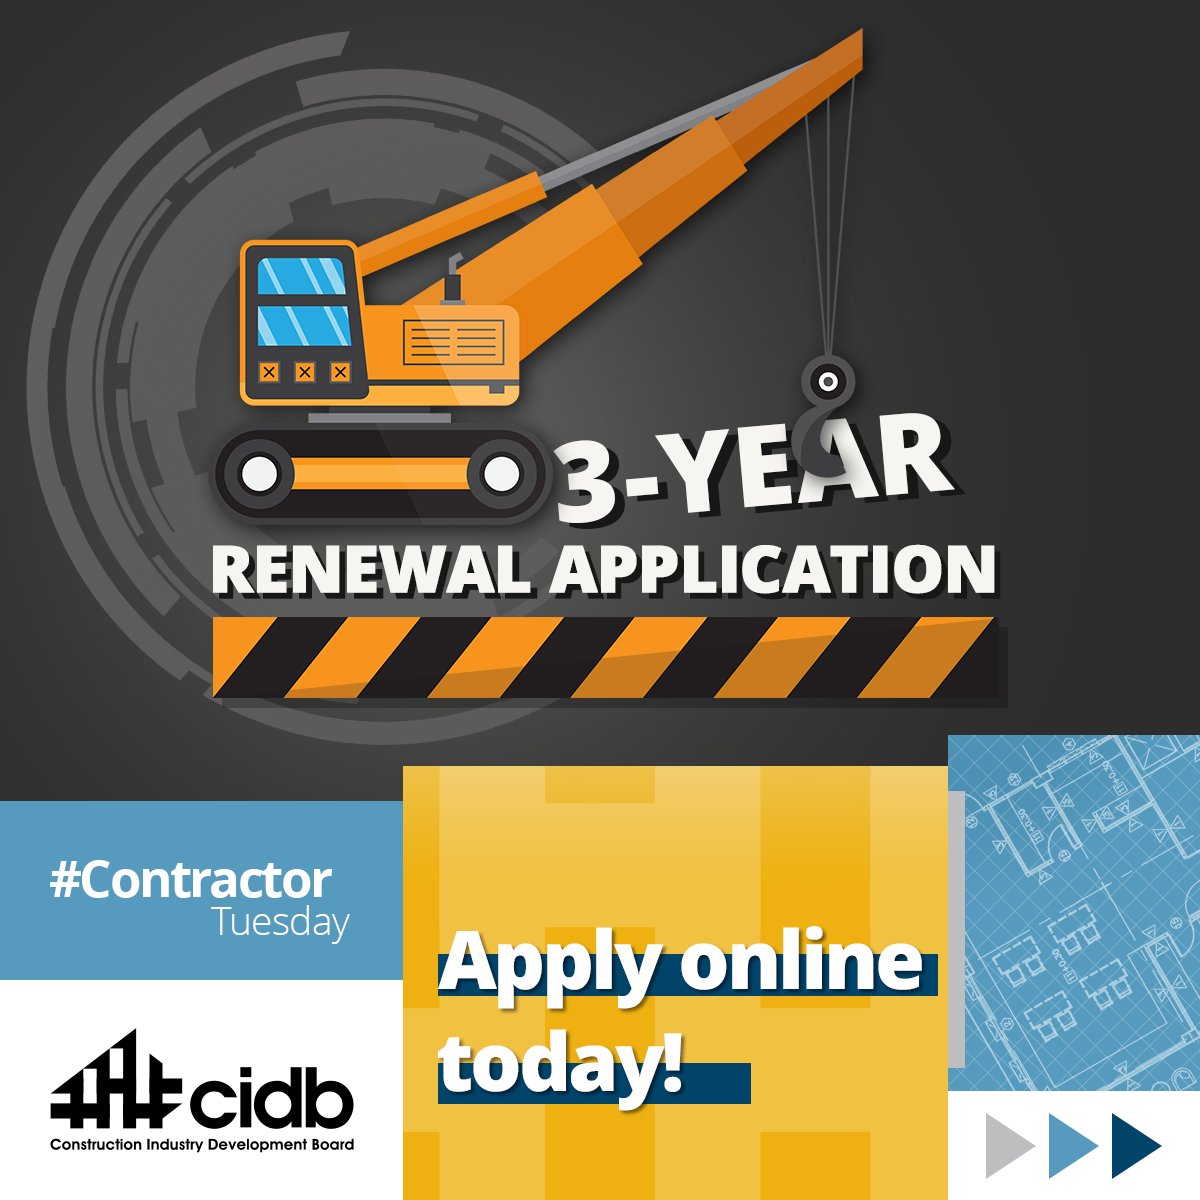 #ContractorTuesday. Renewing your #cidb registration just got easier! 𝗬𝗼𝘂 𝗰𝗮𝗻 𝗻𝗼𝘄 𝗮𝗽𝗽𝗹𝘆 𝗳𝗼𝗿 𝘆𝗼𝘂𝗿 𝟯-𝘆𝗲𝗮𝗿 𝗿𝗲𝗻𝗲𝘄𝗮𝗹 𝗼𝗻𝗹𝗶𝗻𝗲 𝗮𝗻𝗱 𝘂𝗽𝗹𝗼𝗮𝗱 𝘁𝗵𝗲 𝗻𝗲𝗲𝗱𝗲𝗱 𝗱𝗼𝗰𝘂𝗺𝗲𝗻𝘁𝘀. Or email them to your nearest provincial office. Mandatory…